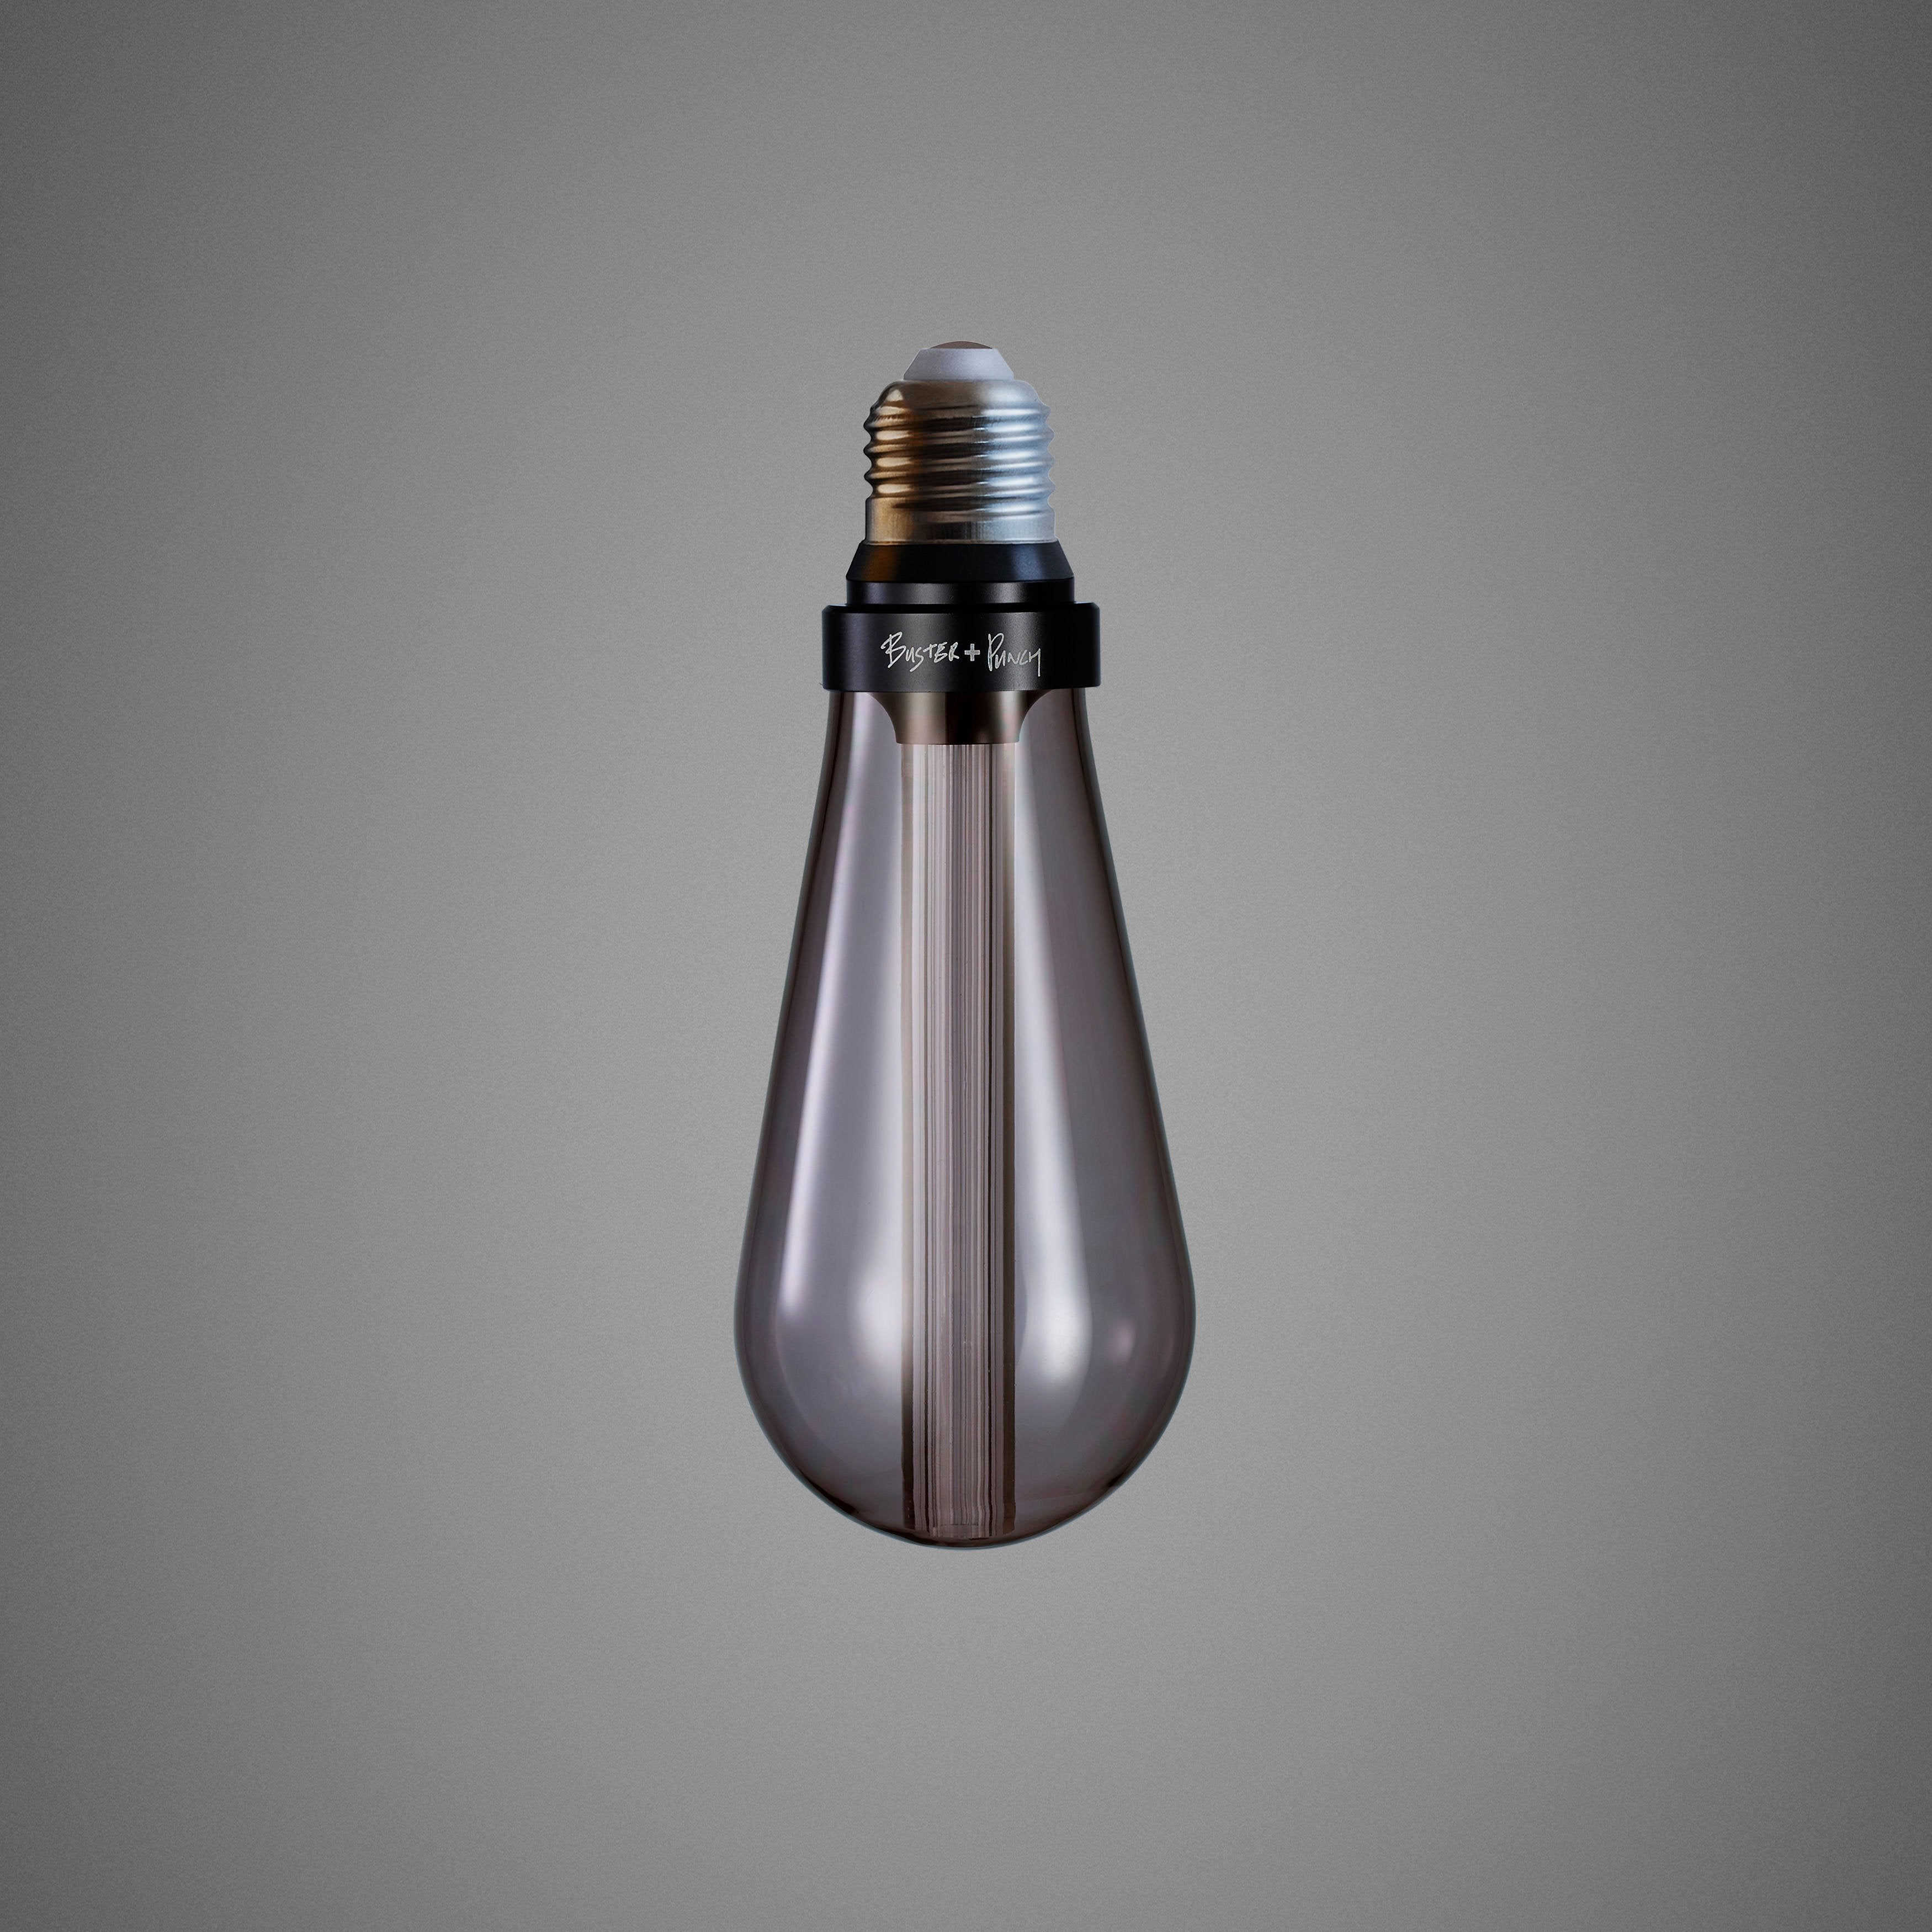 BUSTER BULB / SMOKED -  DIMMABLE - E27